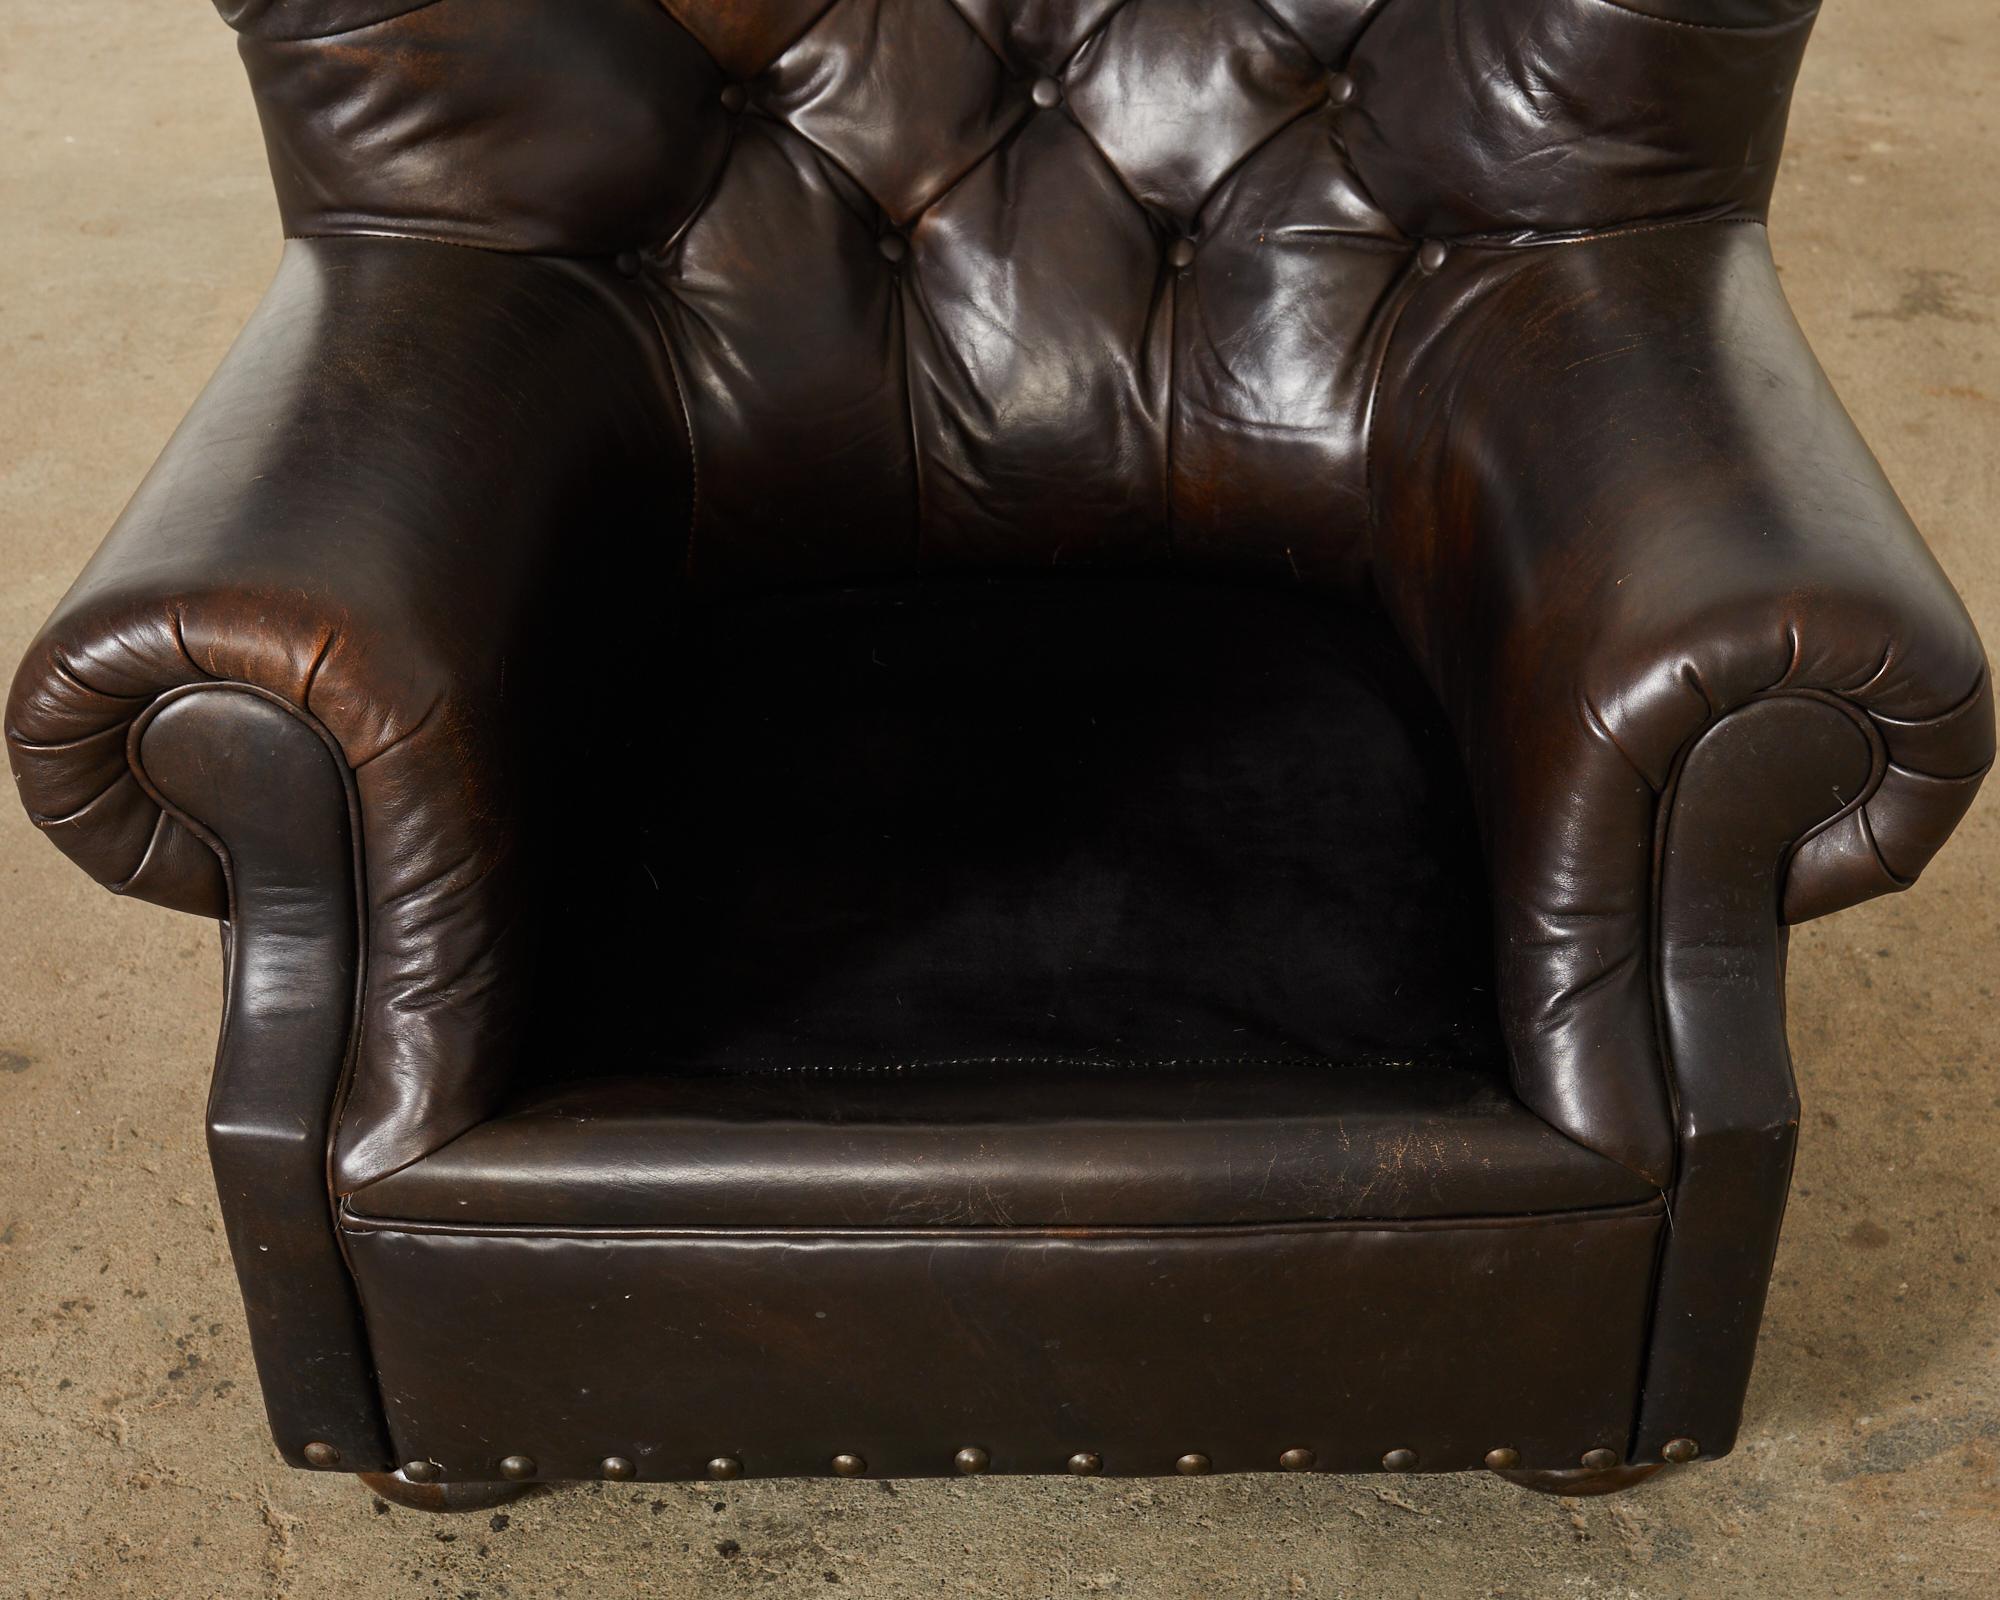 Ralph Lauren Tufted Cigar Leather Wingback Writer's Chair  In Distressed Condition For Sale In Rio Vista, CA